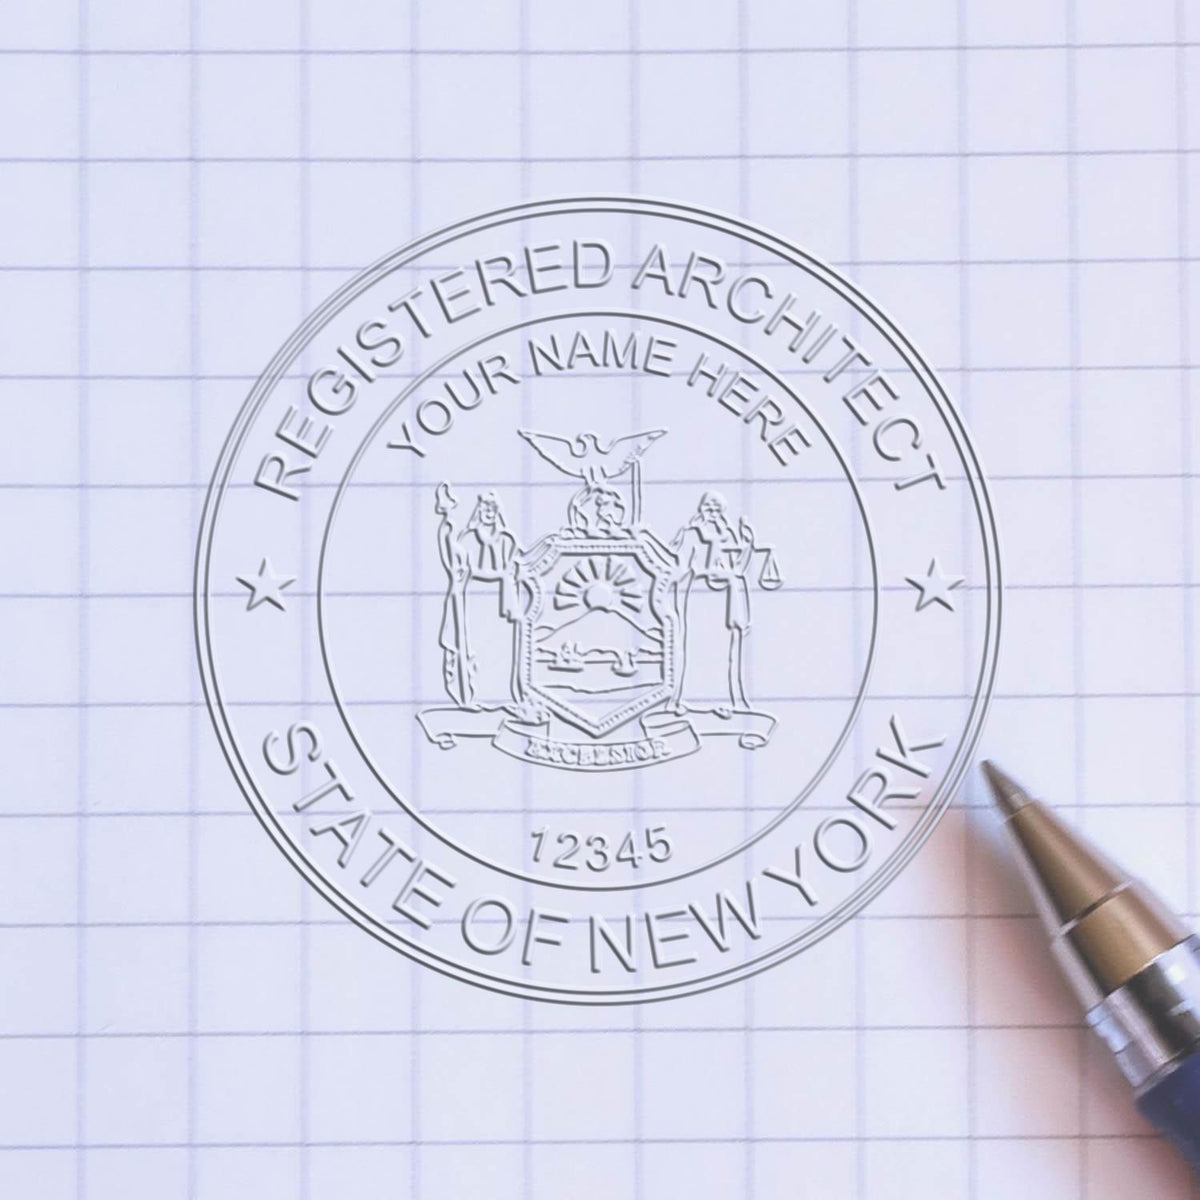 A photograph of the Hybrid New York Architect Seal stamp impression reveals a vivid, professional image of the on paper.